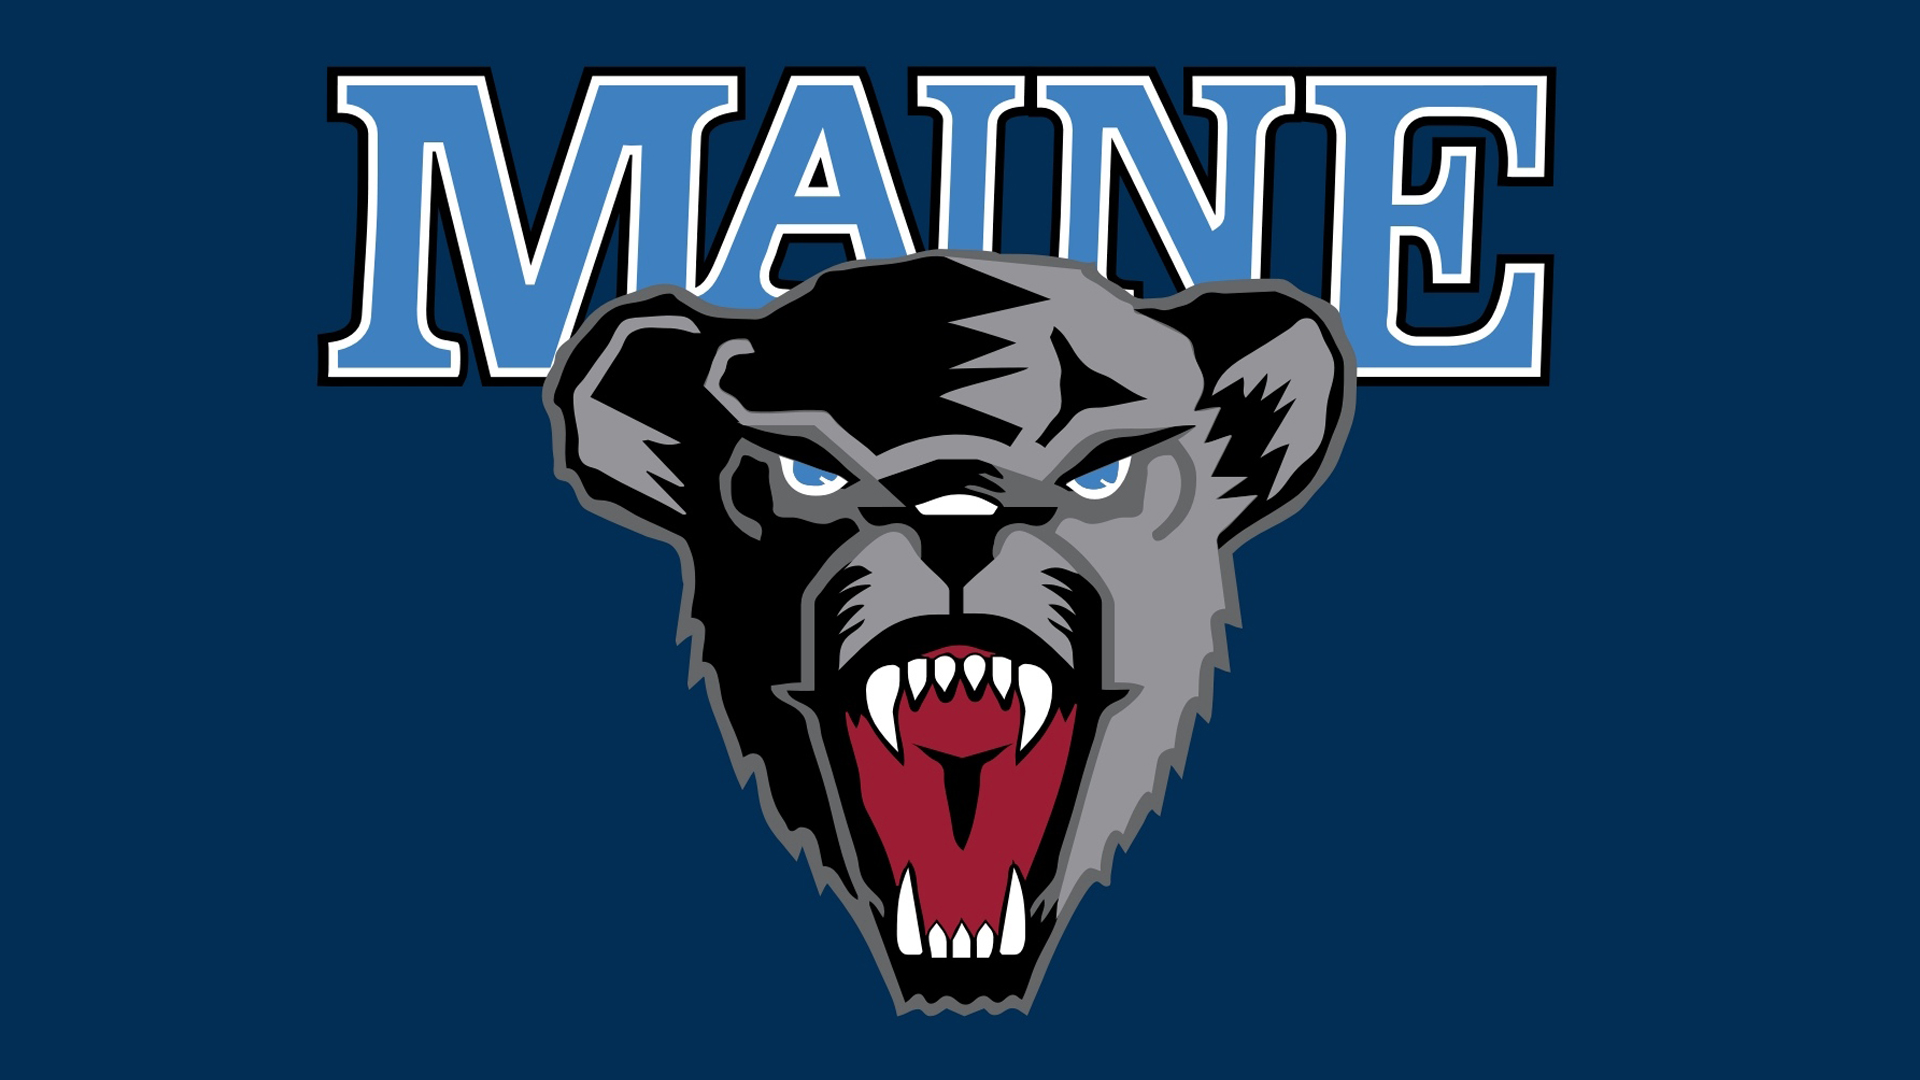 The UMaine Black Bears Won and Going to Semifinals for First Time